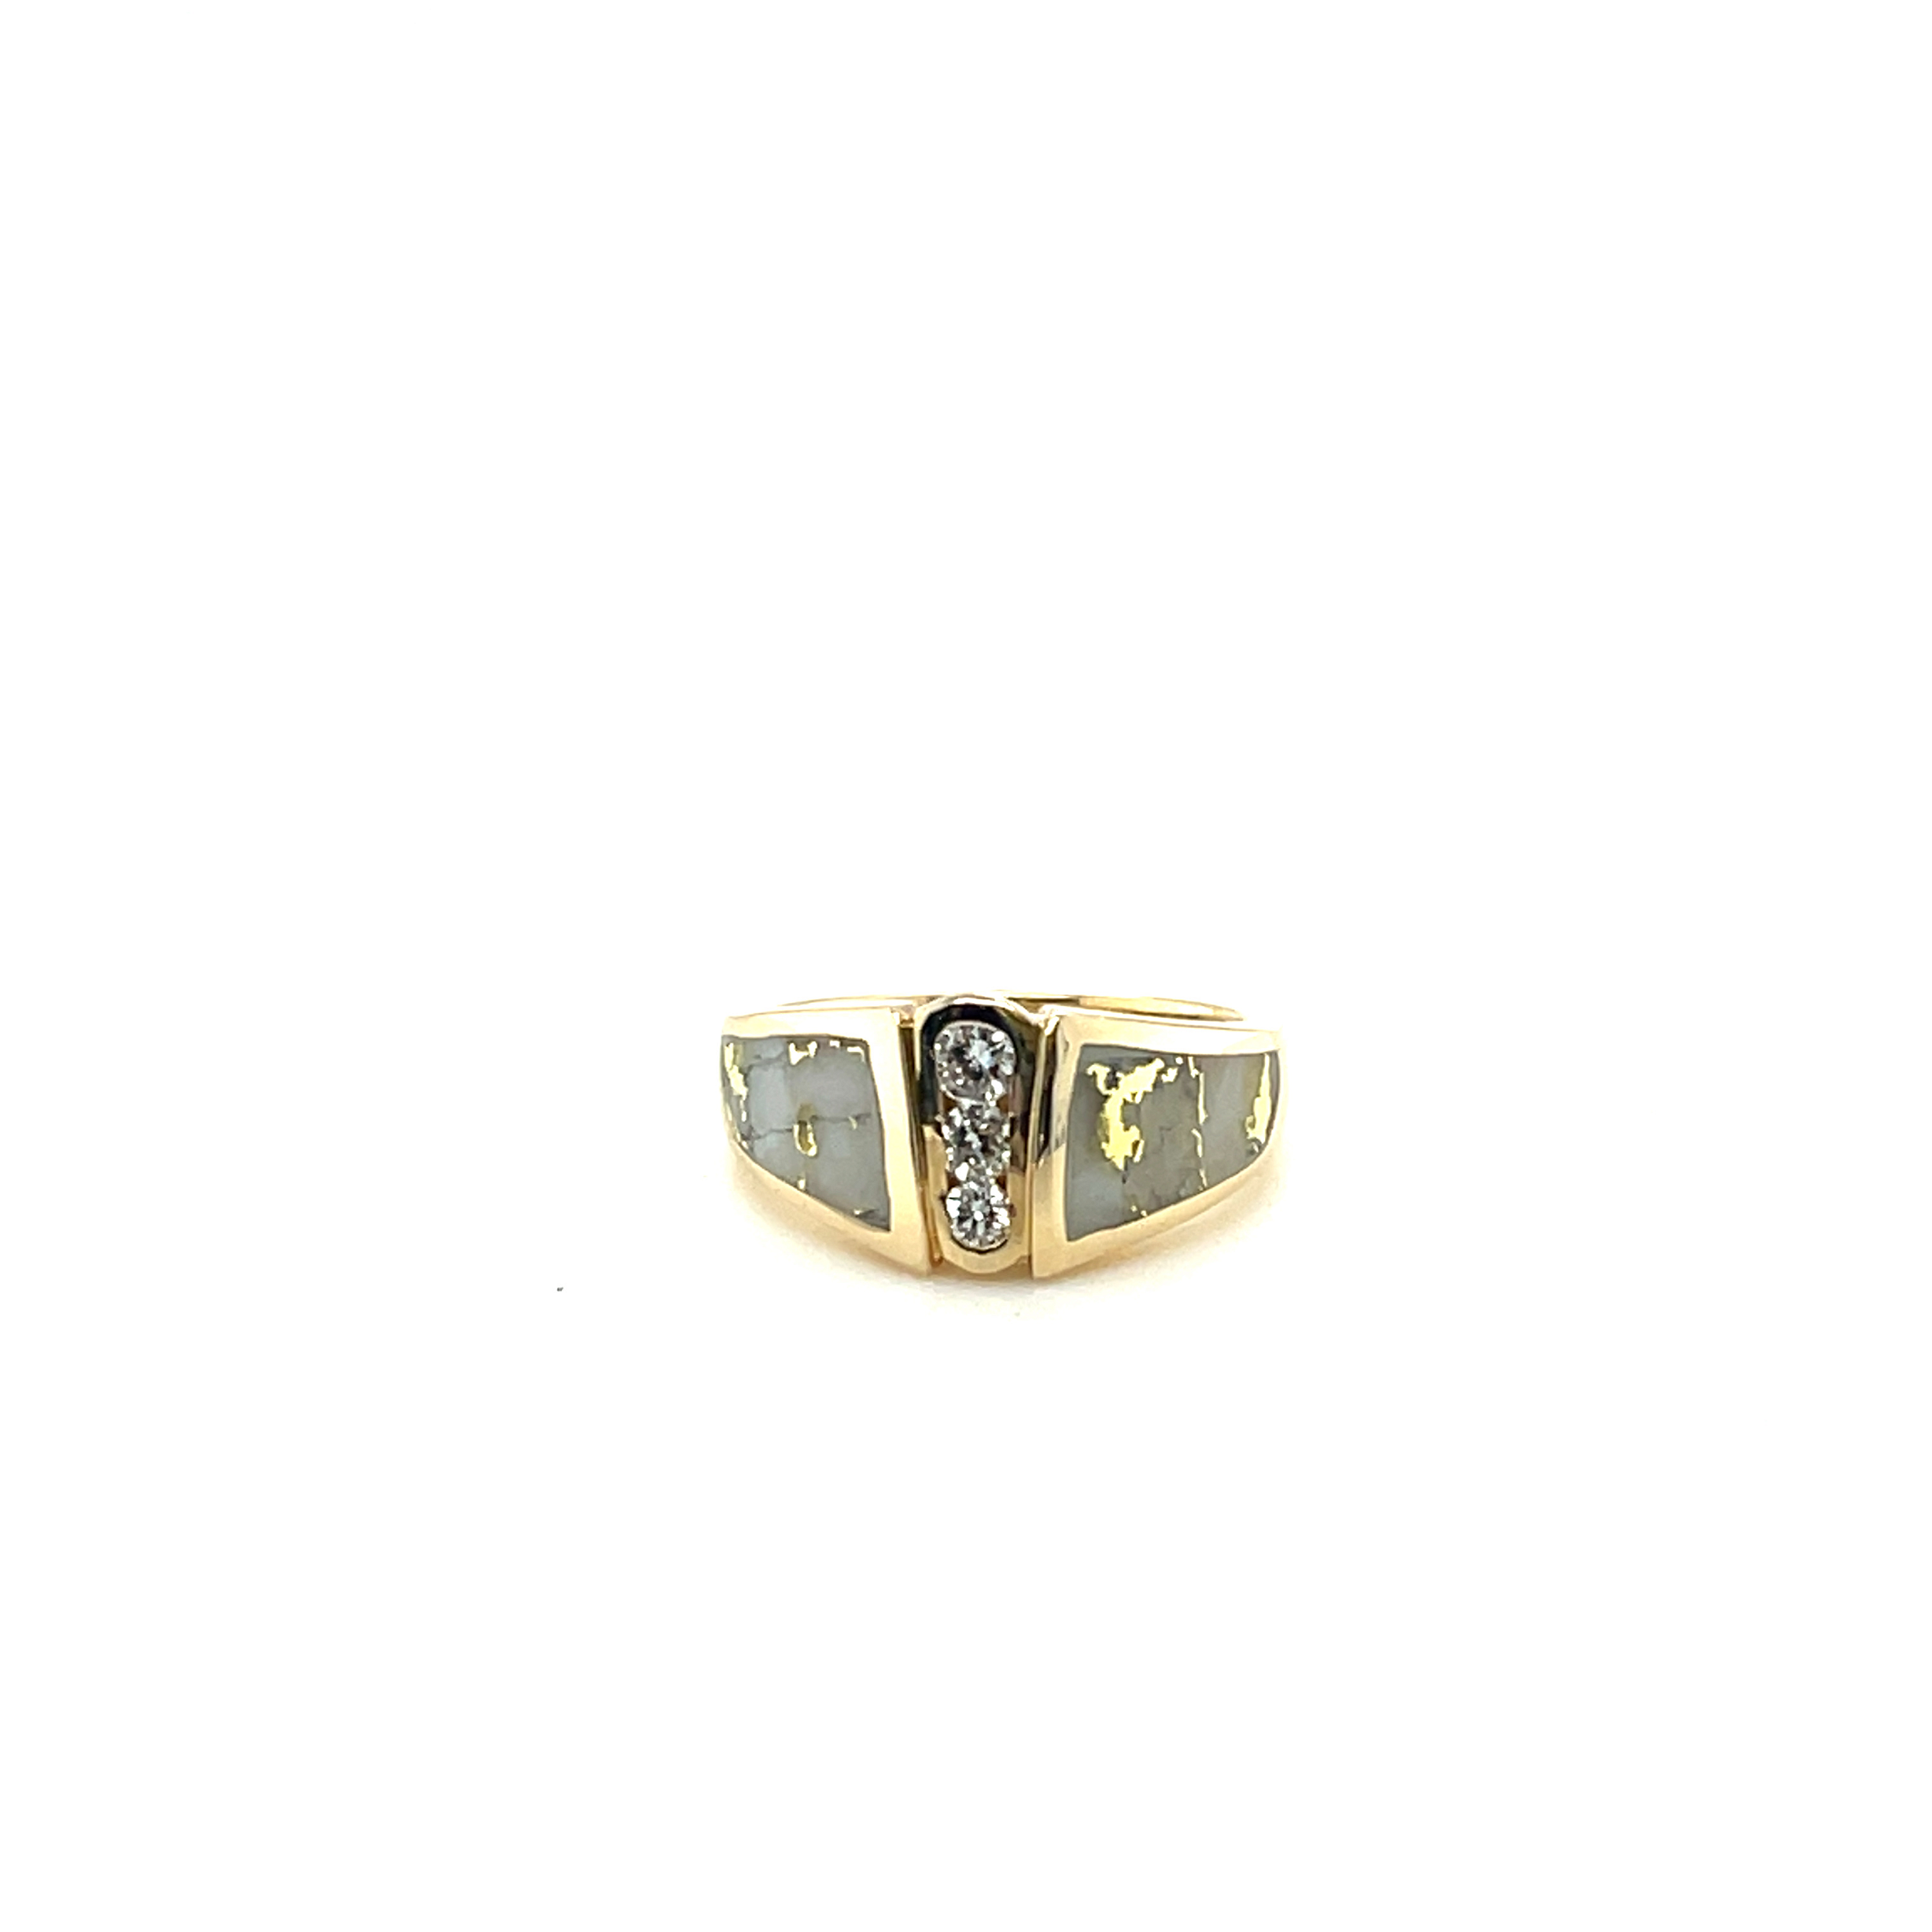 14k YG W/ Gold Quartz Ring by Peter Fisher with 0.24 tw diamonds